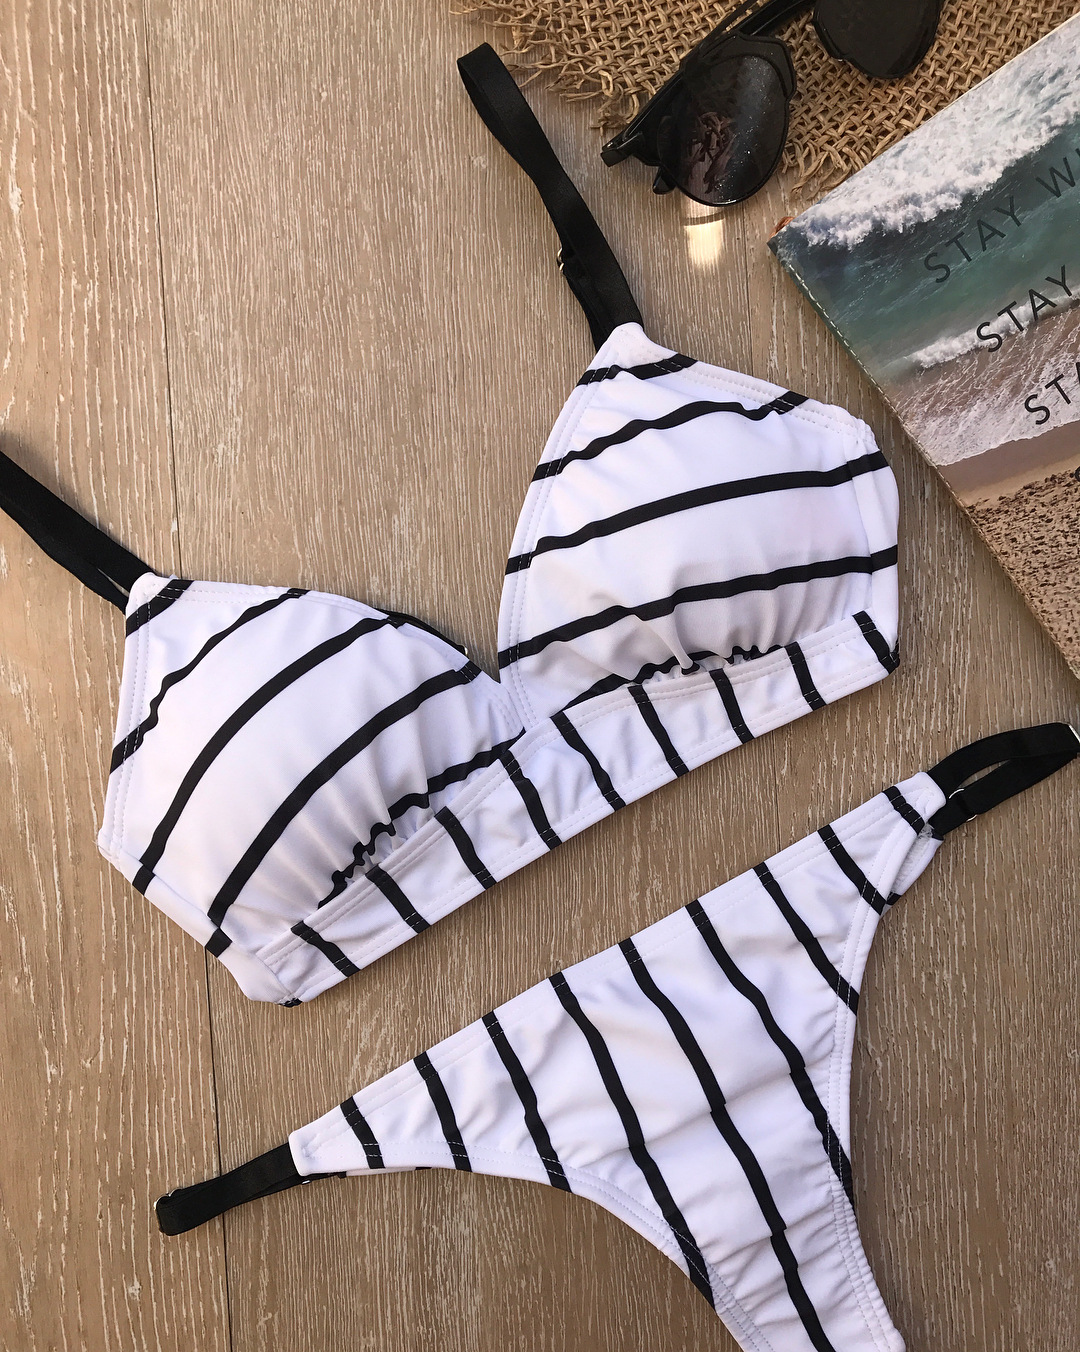 Fashion Swimsuits,two Pieces Swimwear,sexy Lady Swimsuits, Women Swimsuits,white And Black Criss-cross Swimsuits